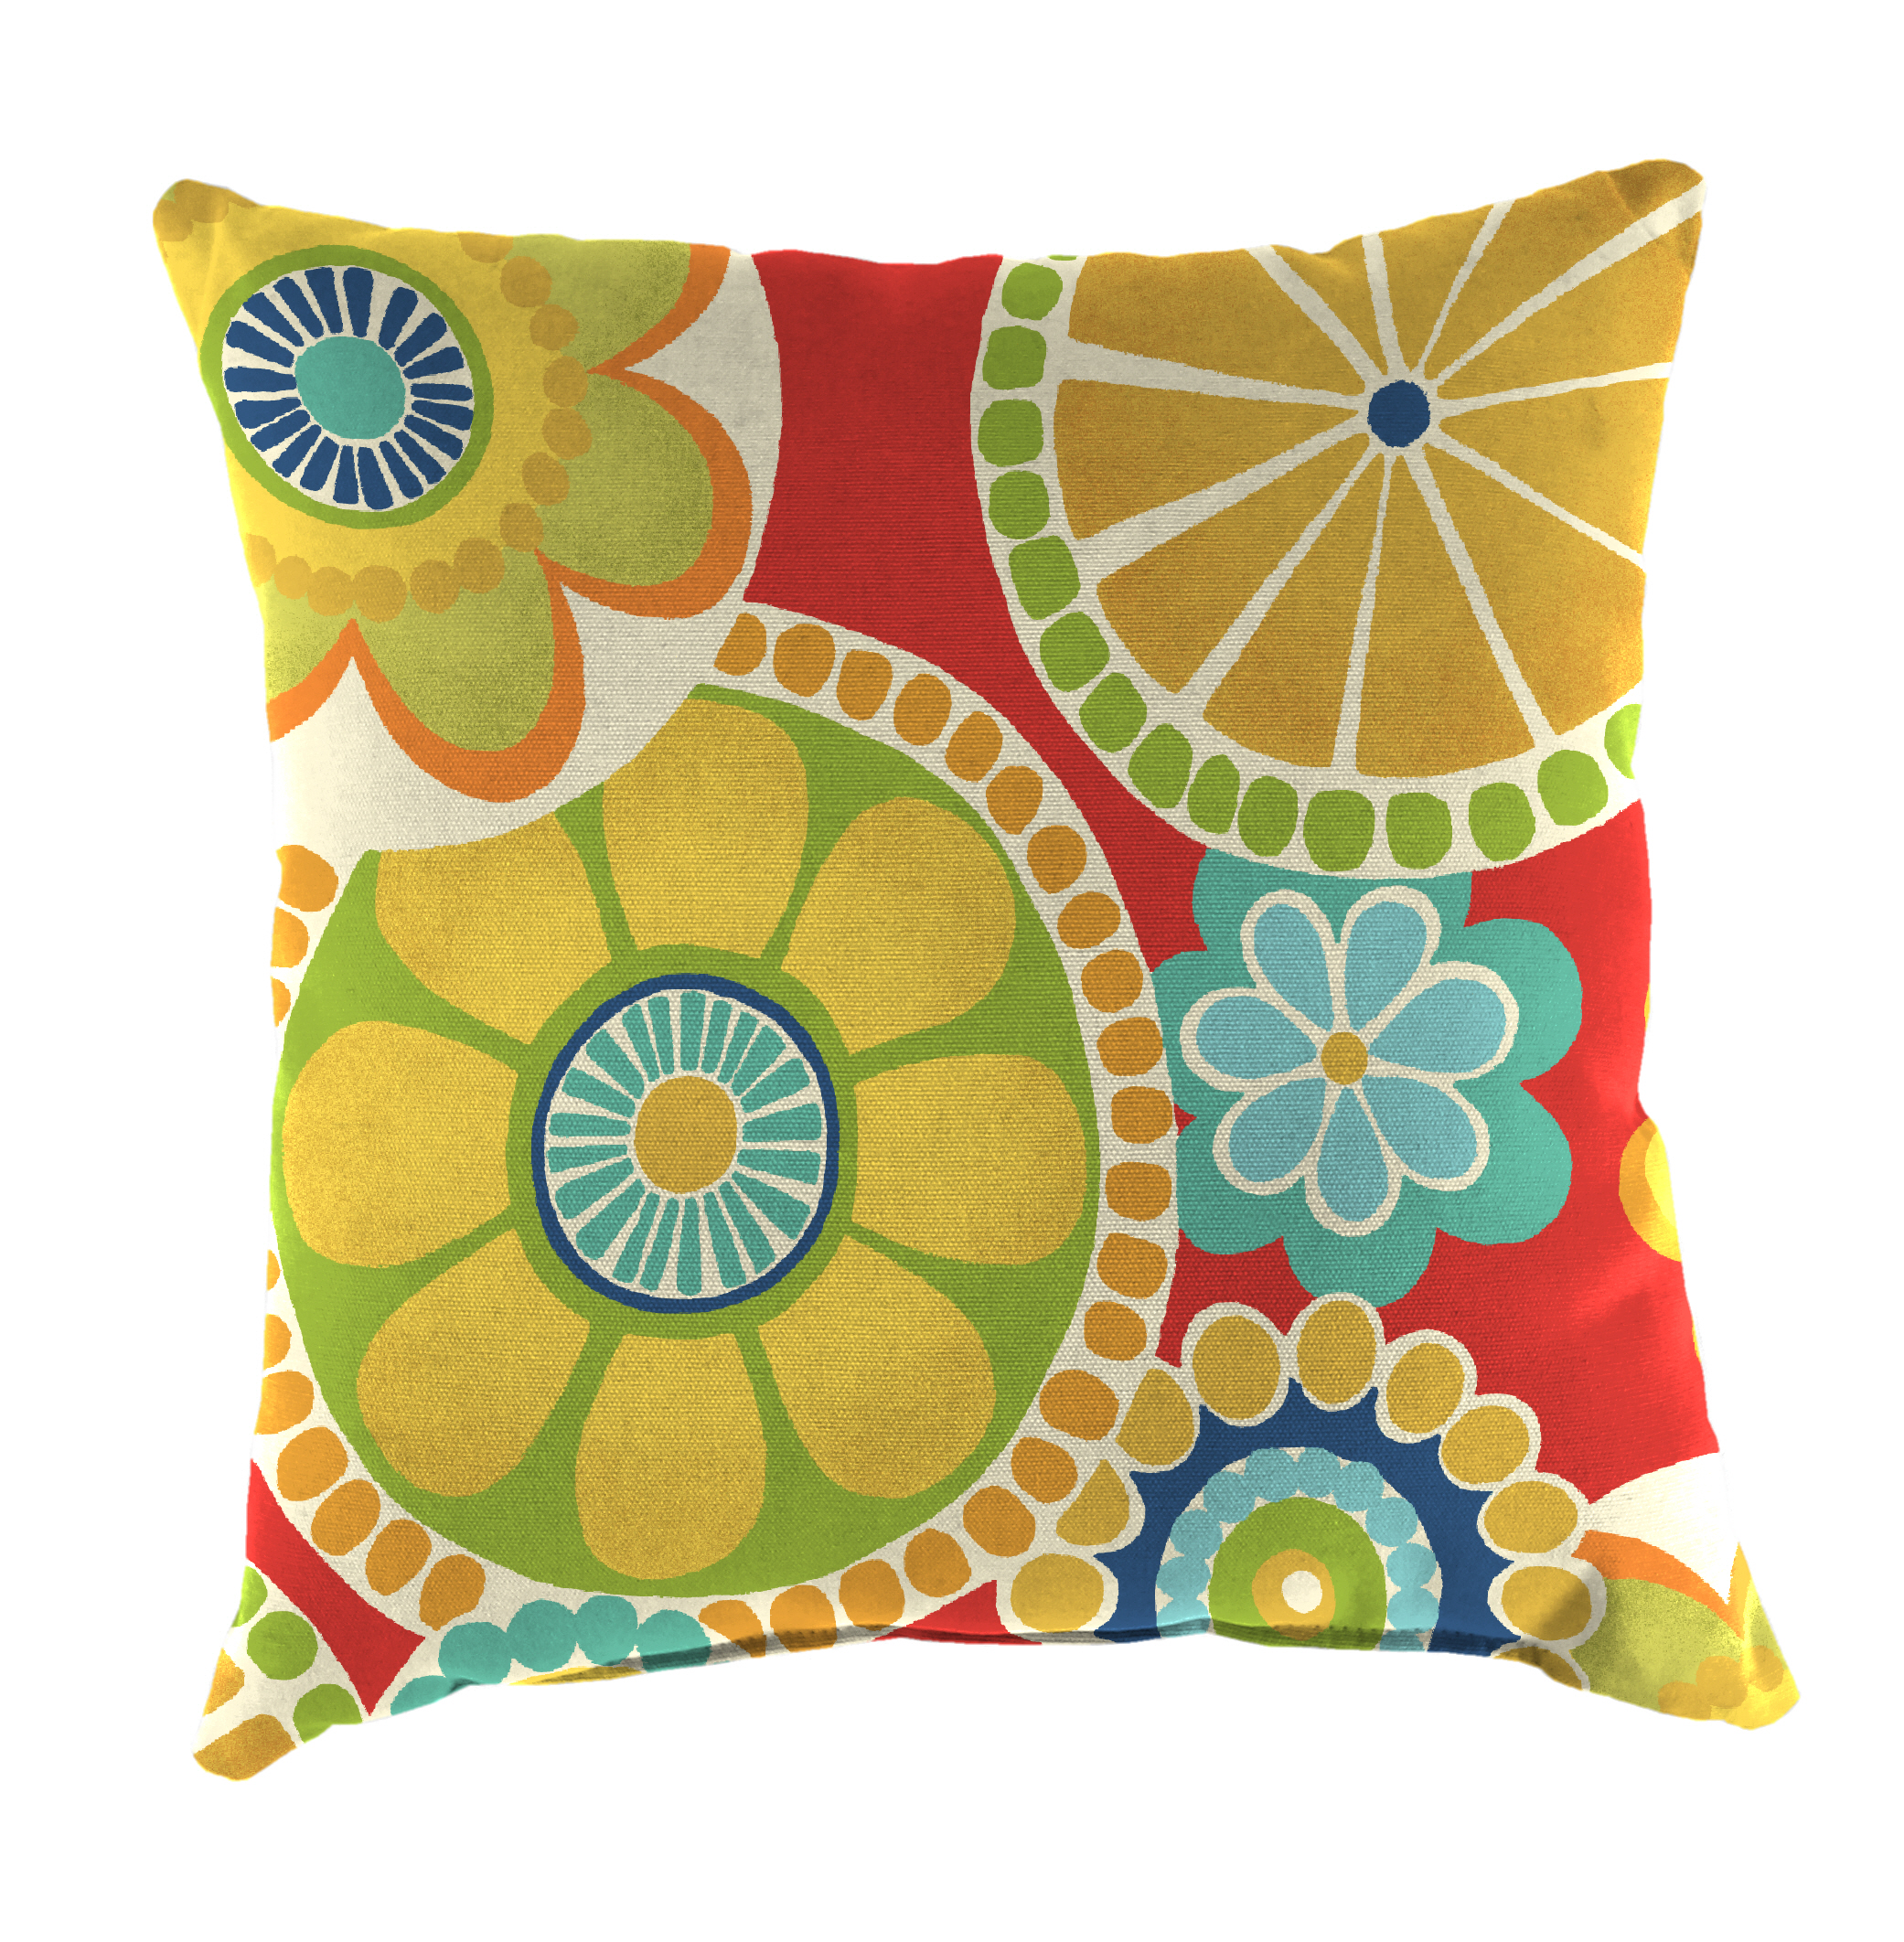 16" Square Patio Throw Pillow in Rosewell Poppy